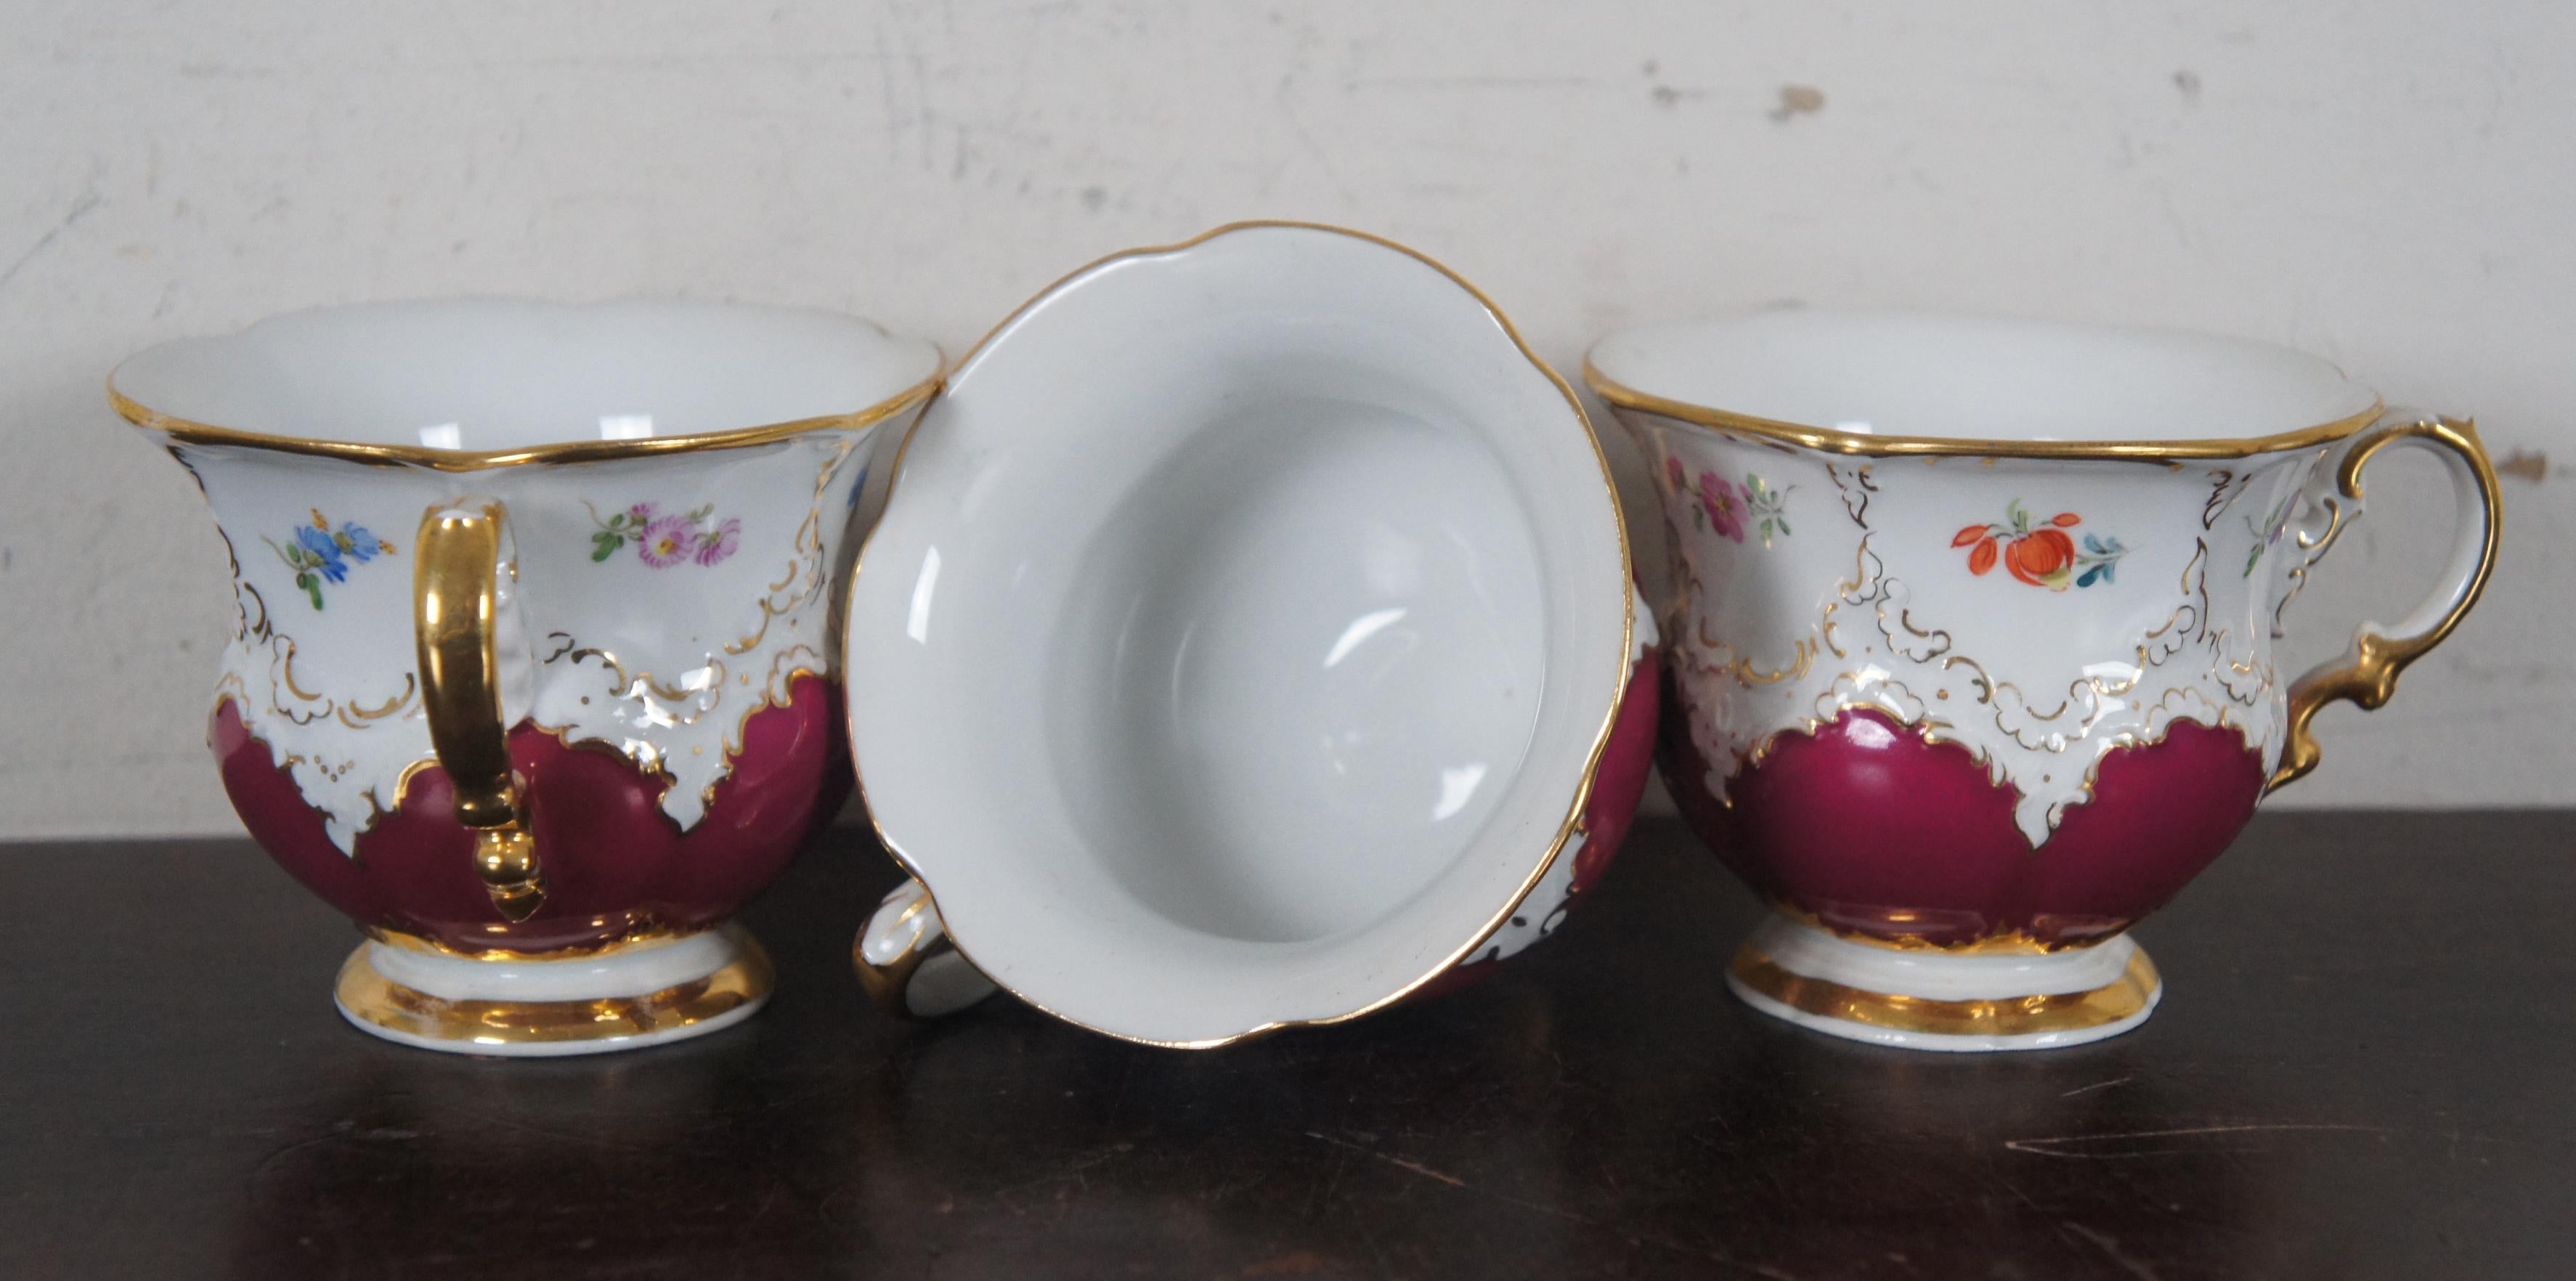 12 Pc Antique Meissen B-Form Teacups & Saucers Floral Crossed Sword Tea Set B154 In Good Condition For Sale In Dayton, OH